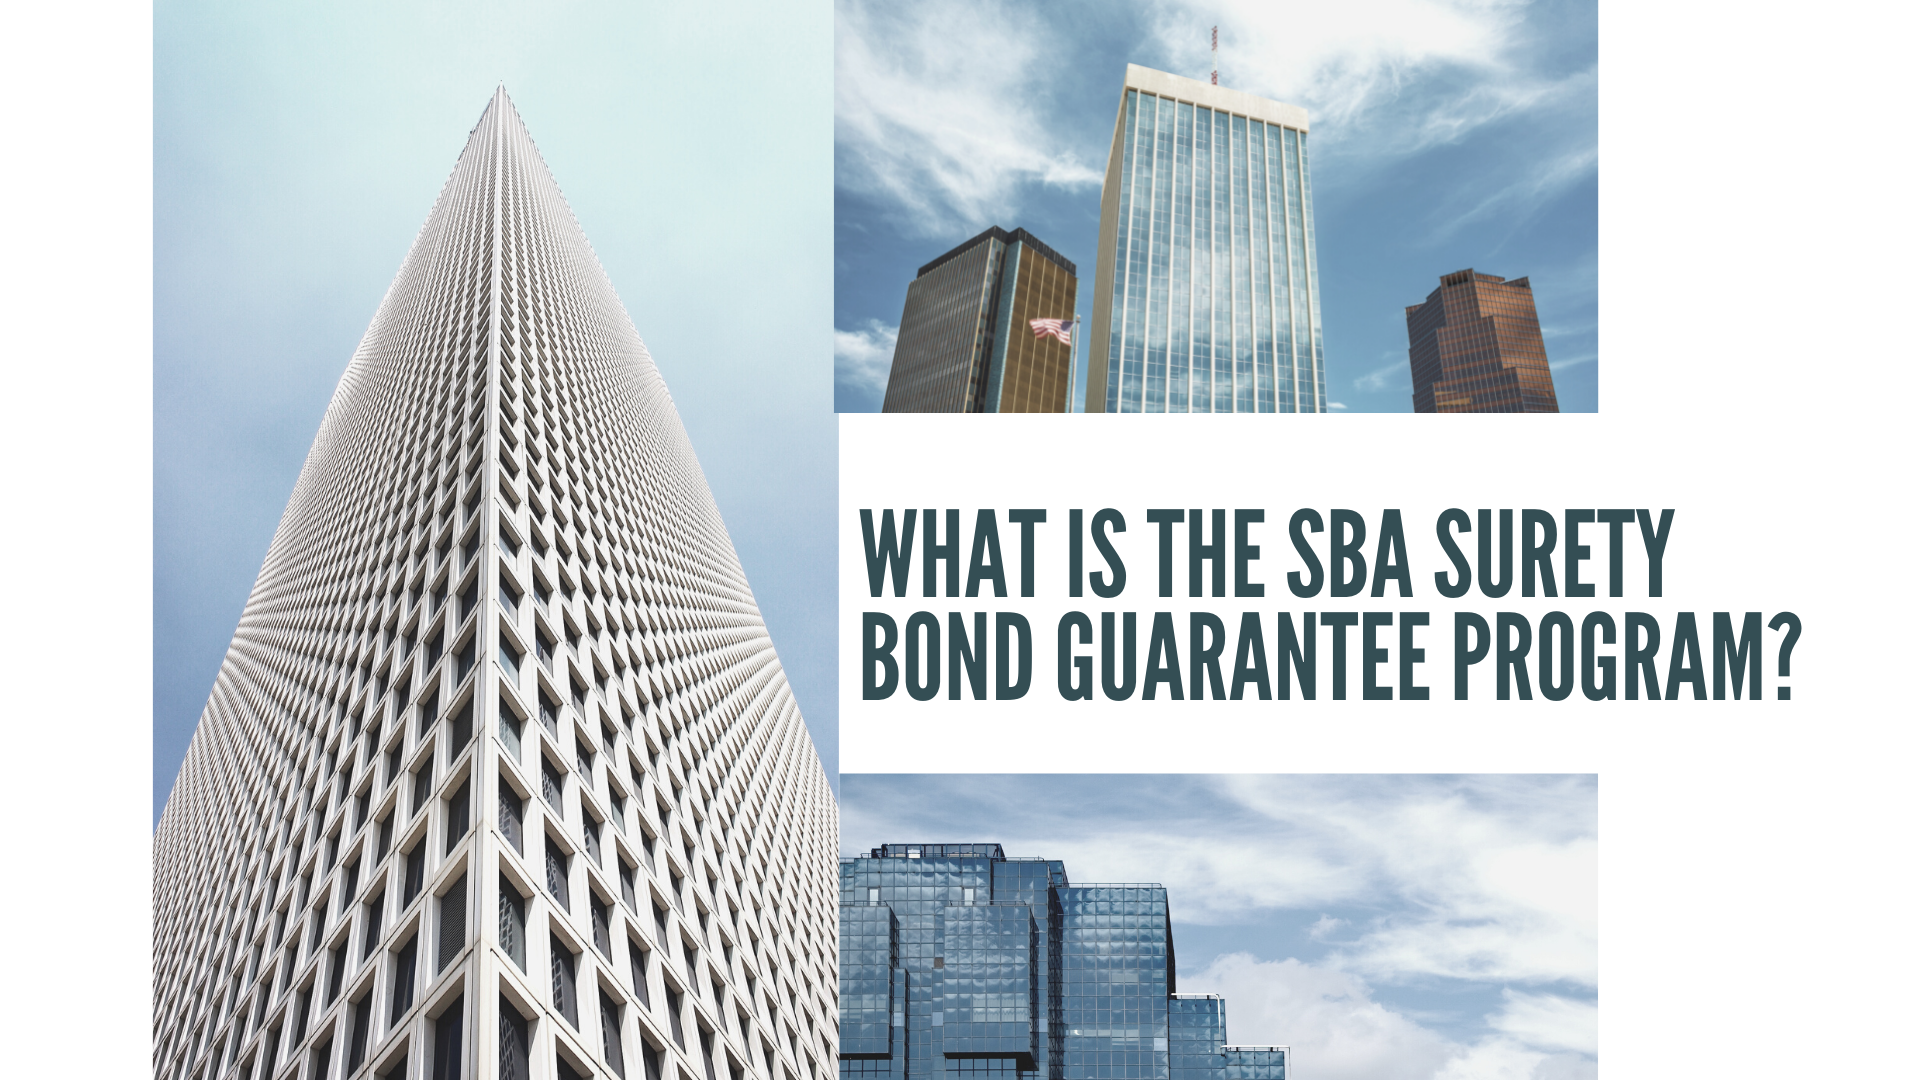 surety bond - What is the Small Business Administration's Surety Bond Guarantee Program - collage of various buildings